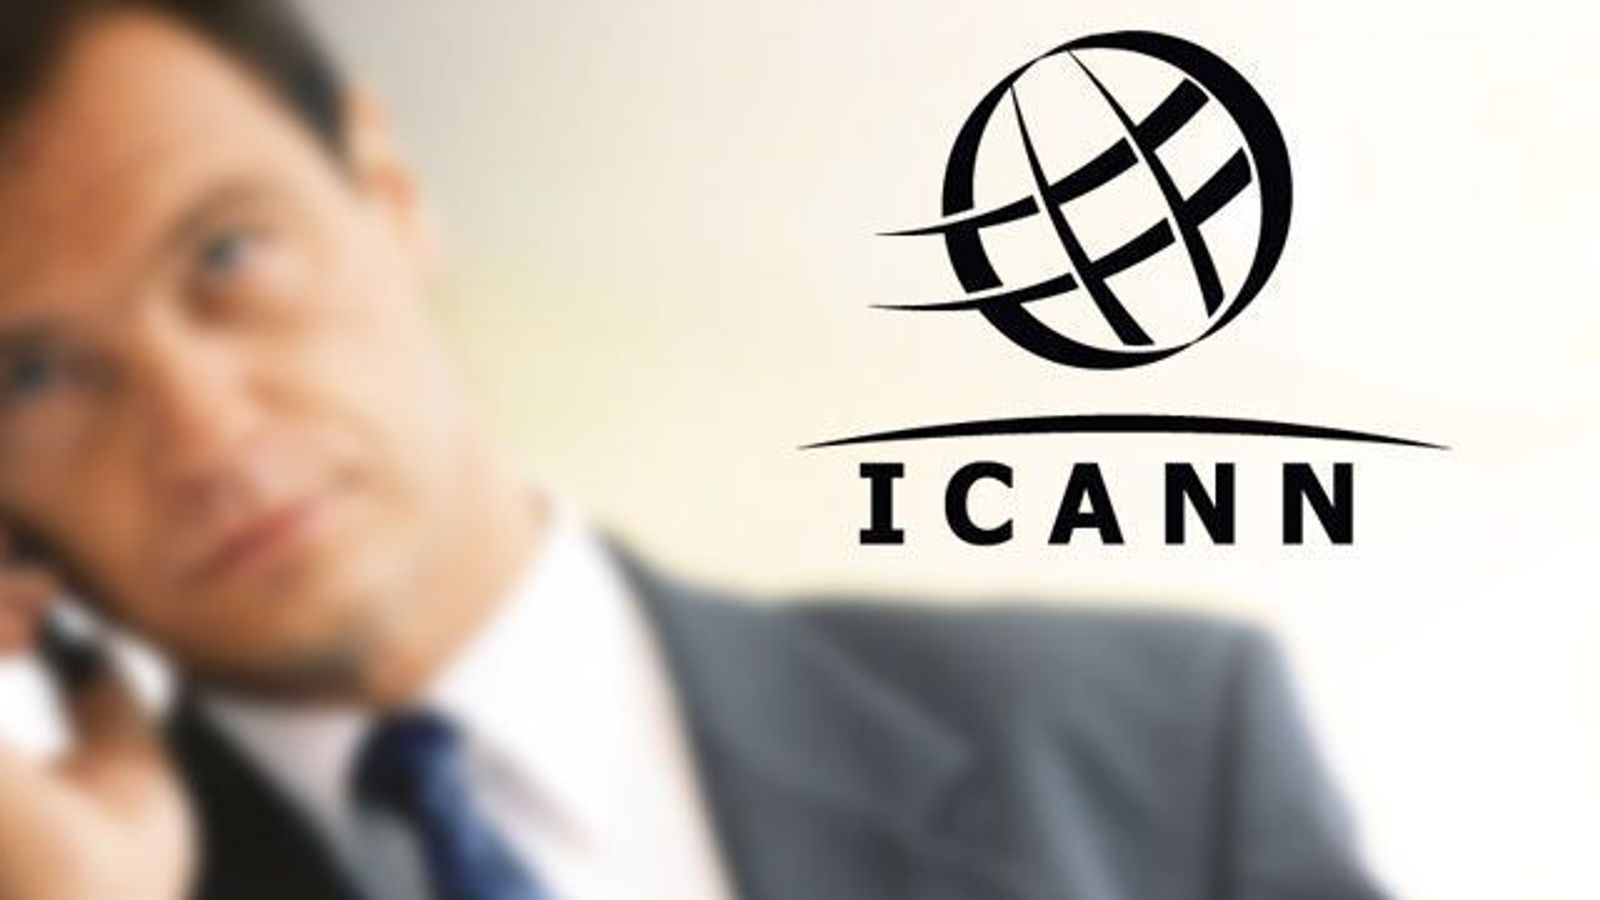 U.S. Announces Plans to Relinquish Oversight of ICANN